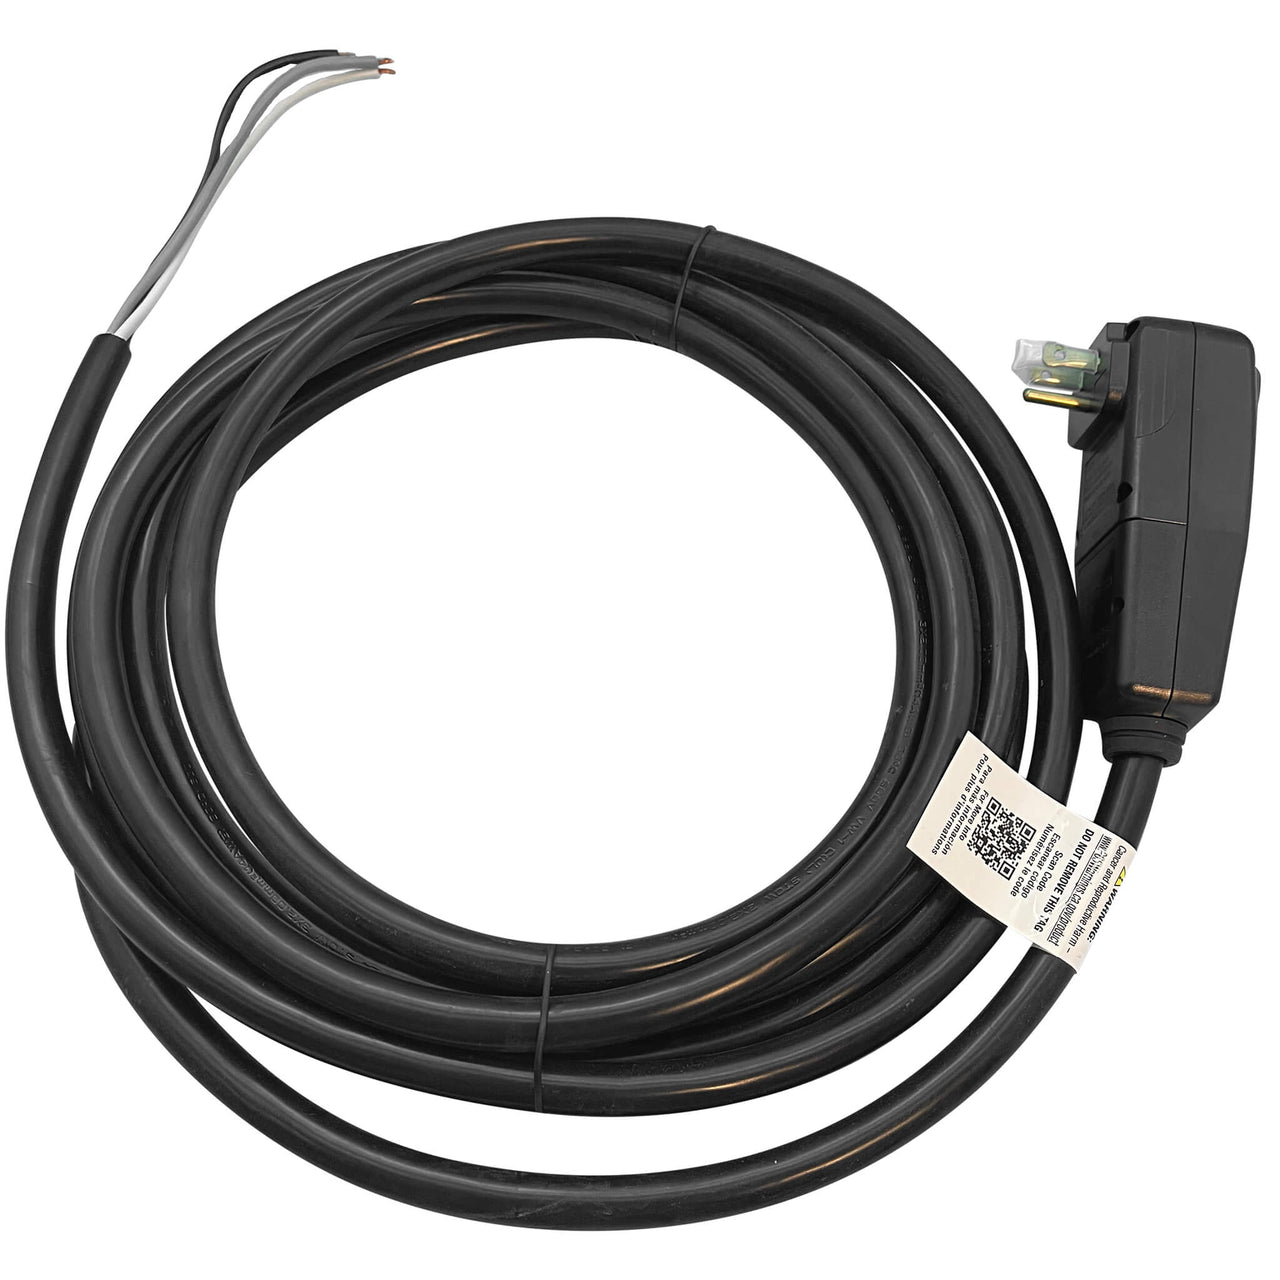 120V GFCI Cord for Hot Tubs